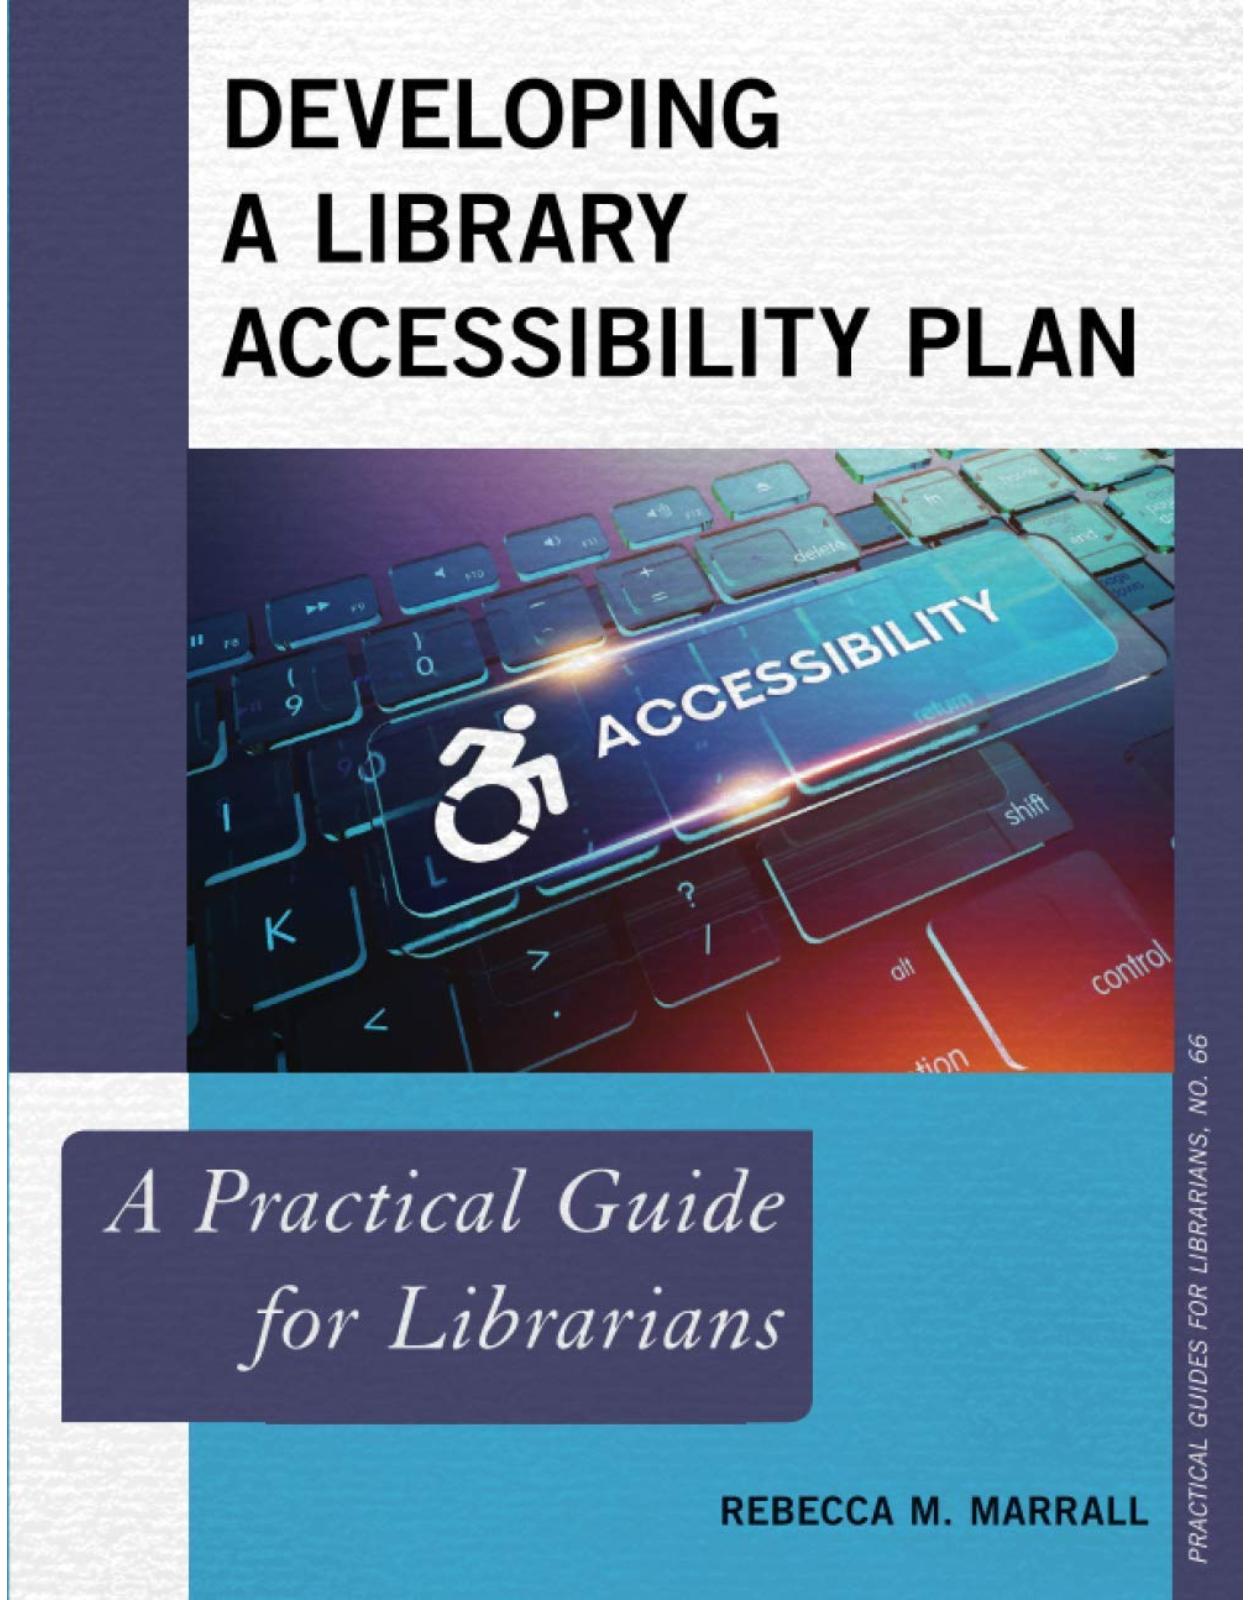 Developing a Library Accessibility Plan: A Practical Guide for Librarians: 66 